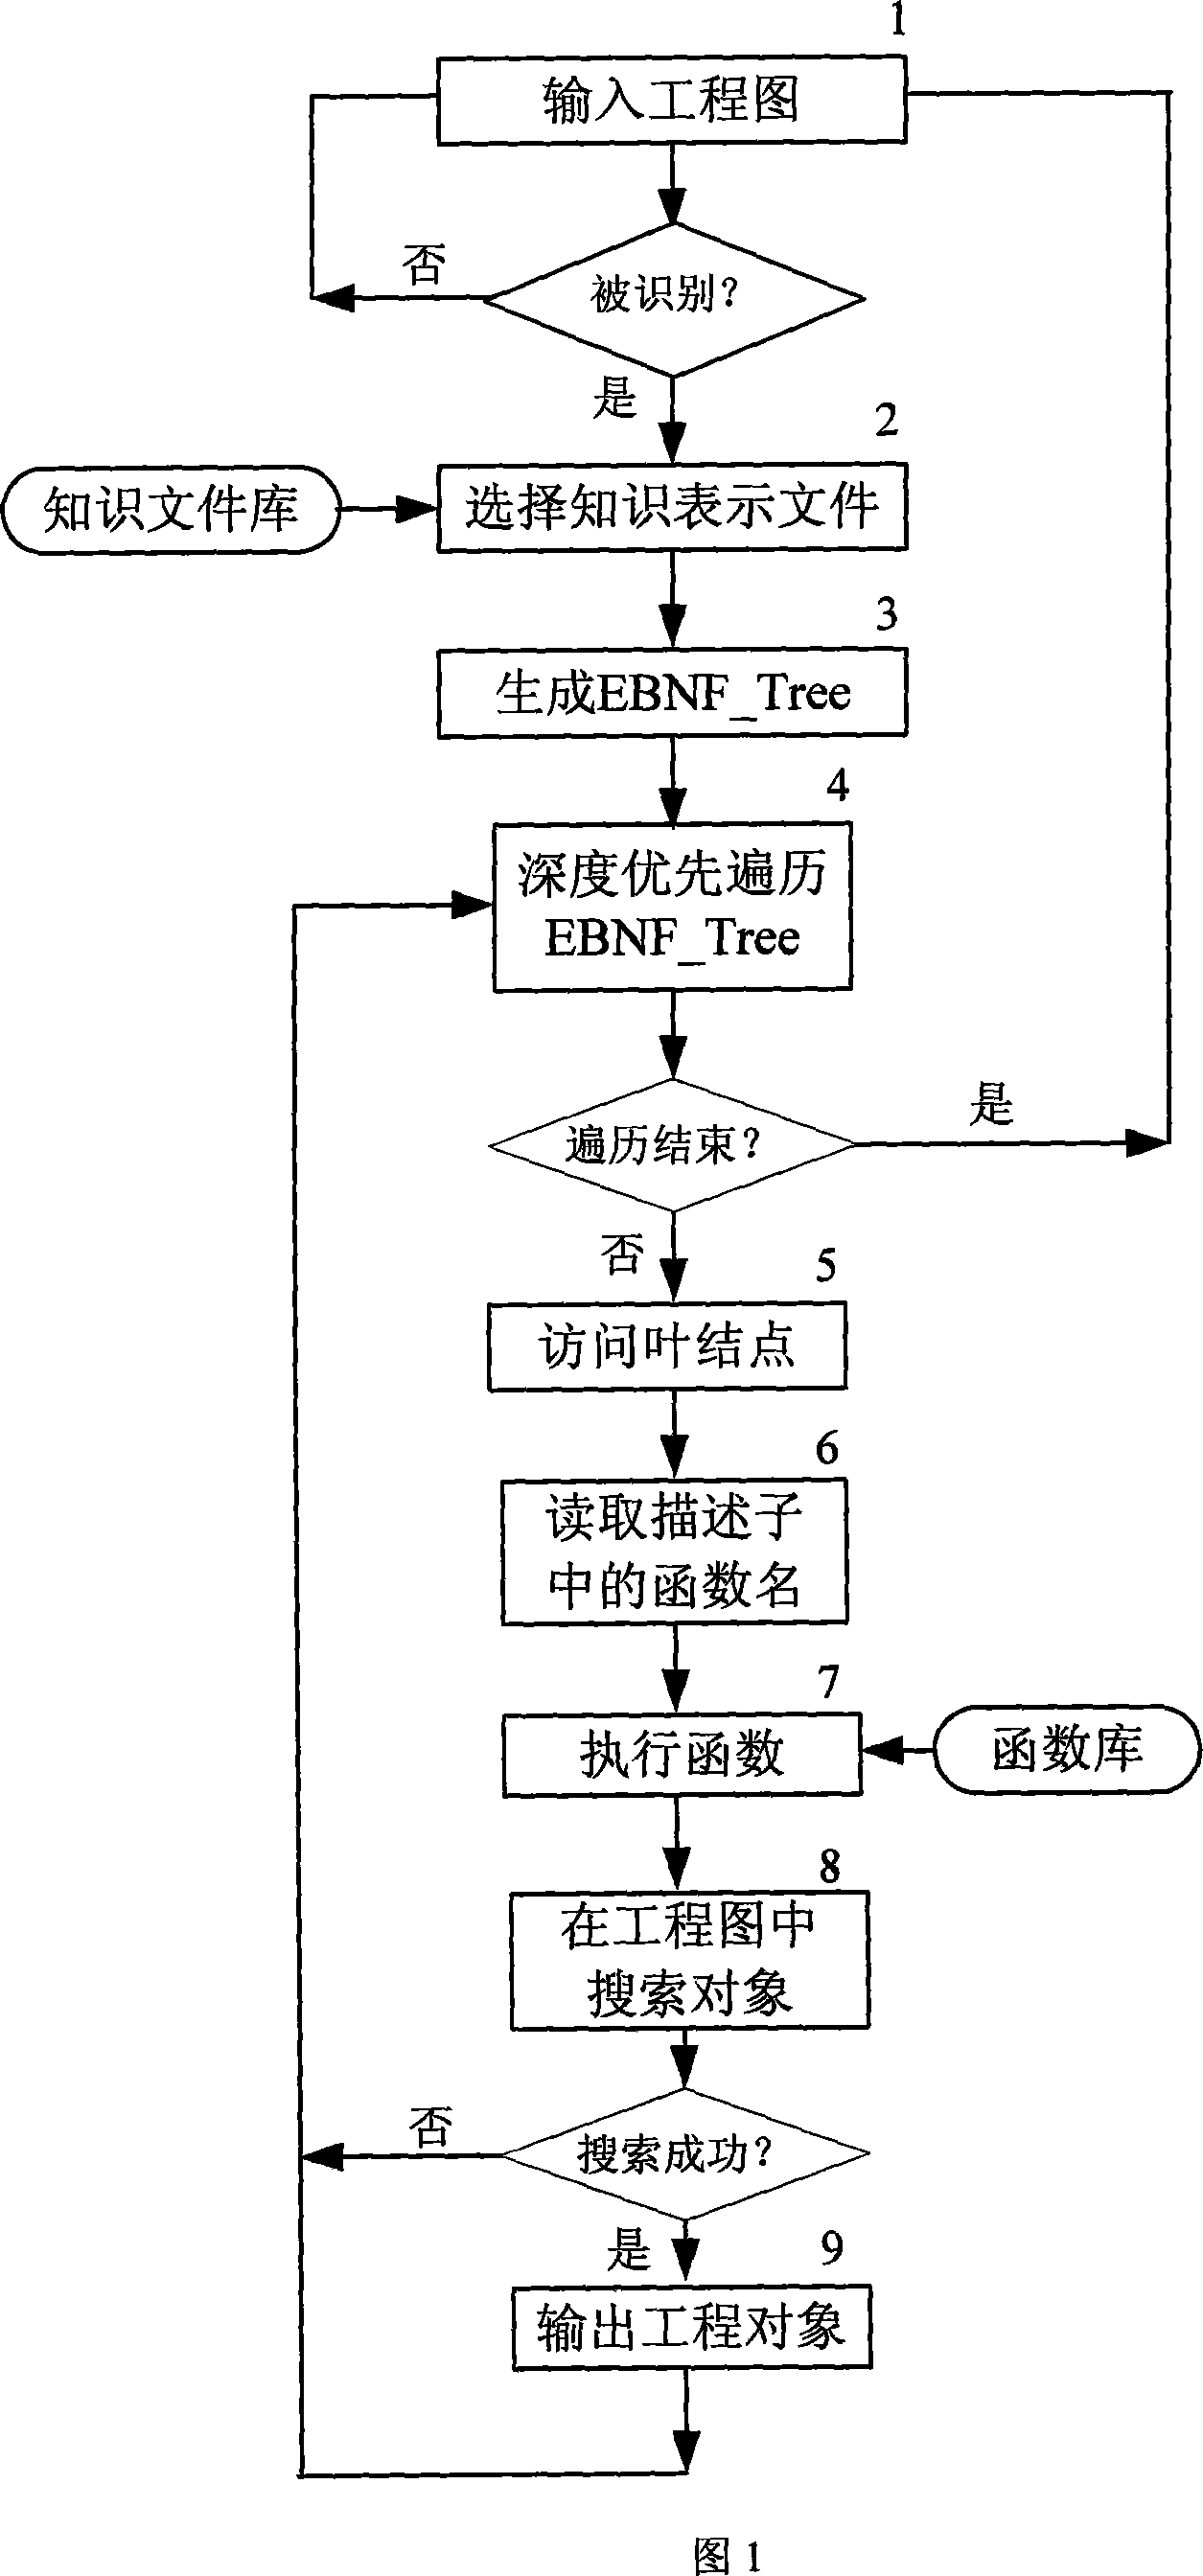 Schedule drawing automatic recognition and comprehend method